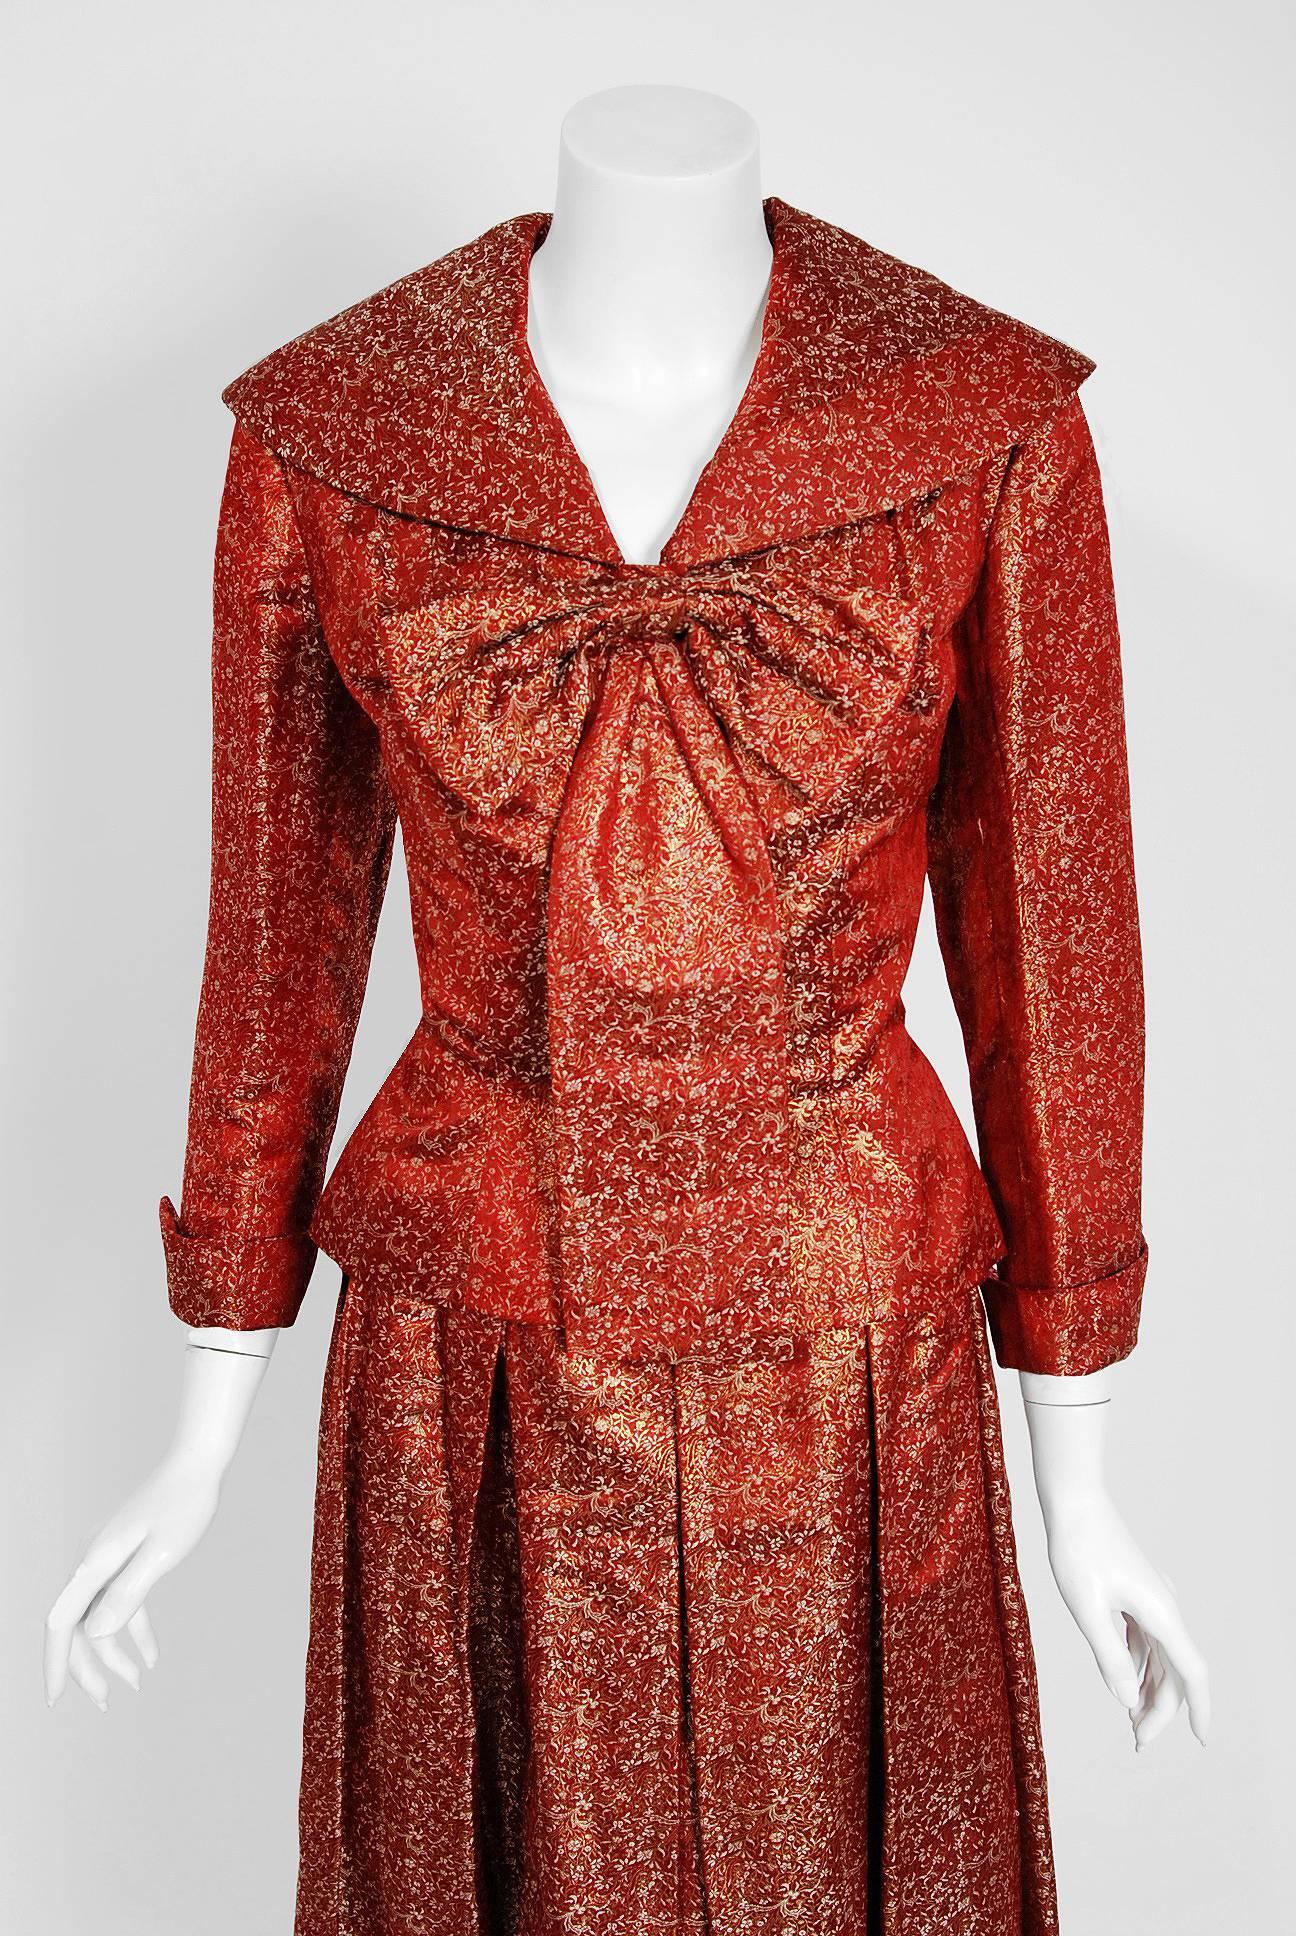 This stunning Salama Haute-Couture ensemble, dating back to 1952, is fashioned in burgundy red fully-lined leaf motif silk brocade. The fabric itself is a masterpiece; vertical woven metallic gold accented silk that seems to have an almost